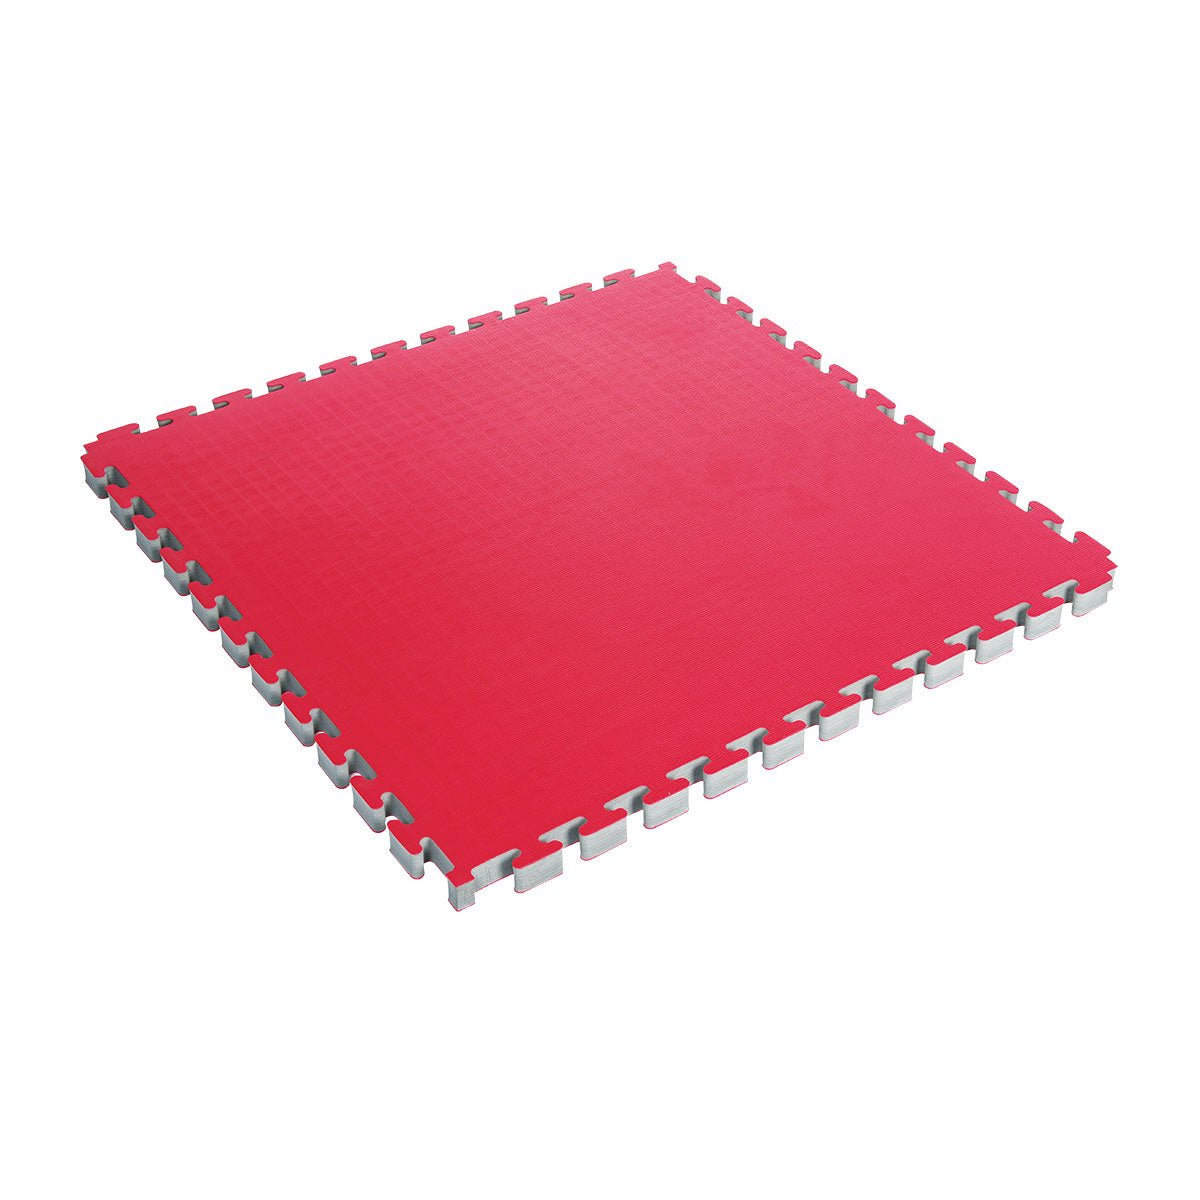 Reversible 1.5" Thick Puzzle Mat 1.5" Red Black